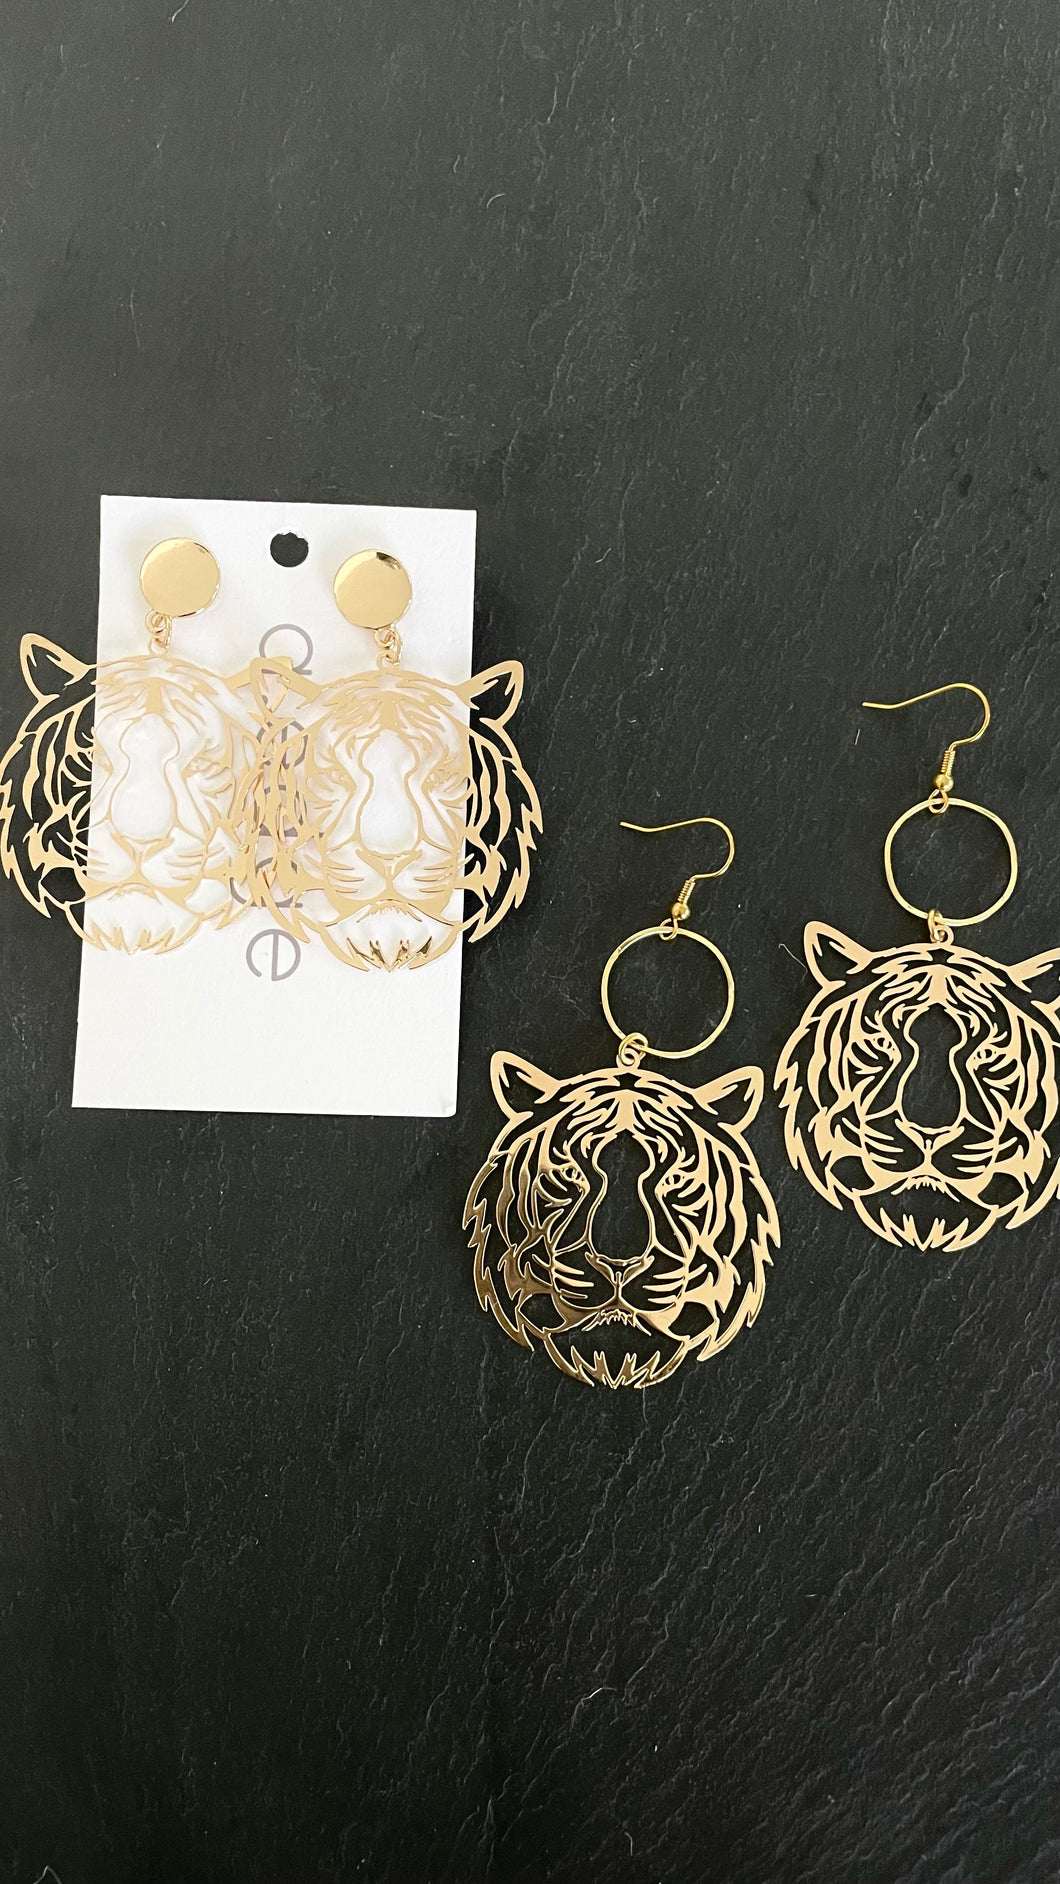 The Gold Tiger Earrings